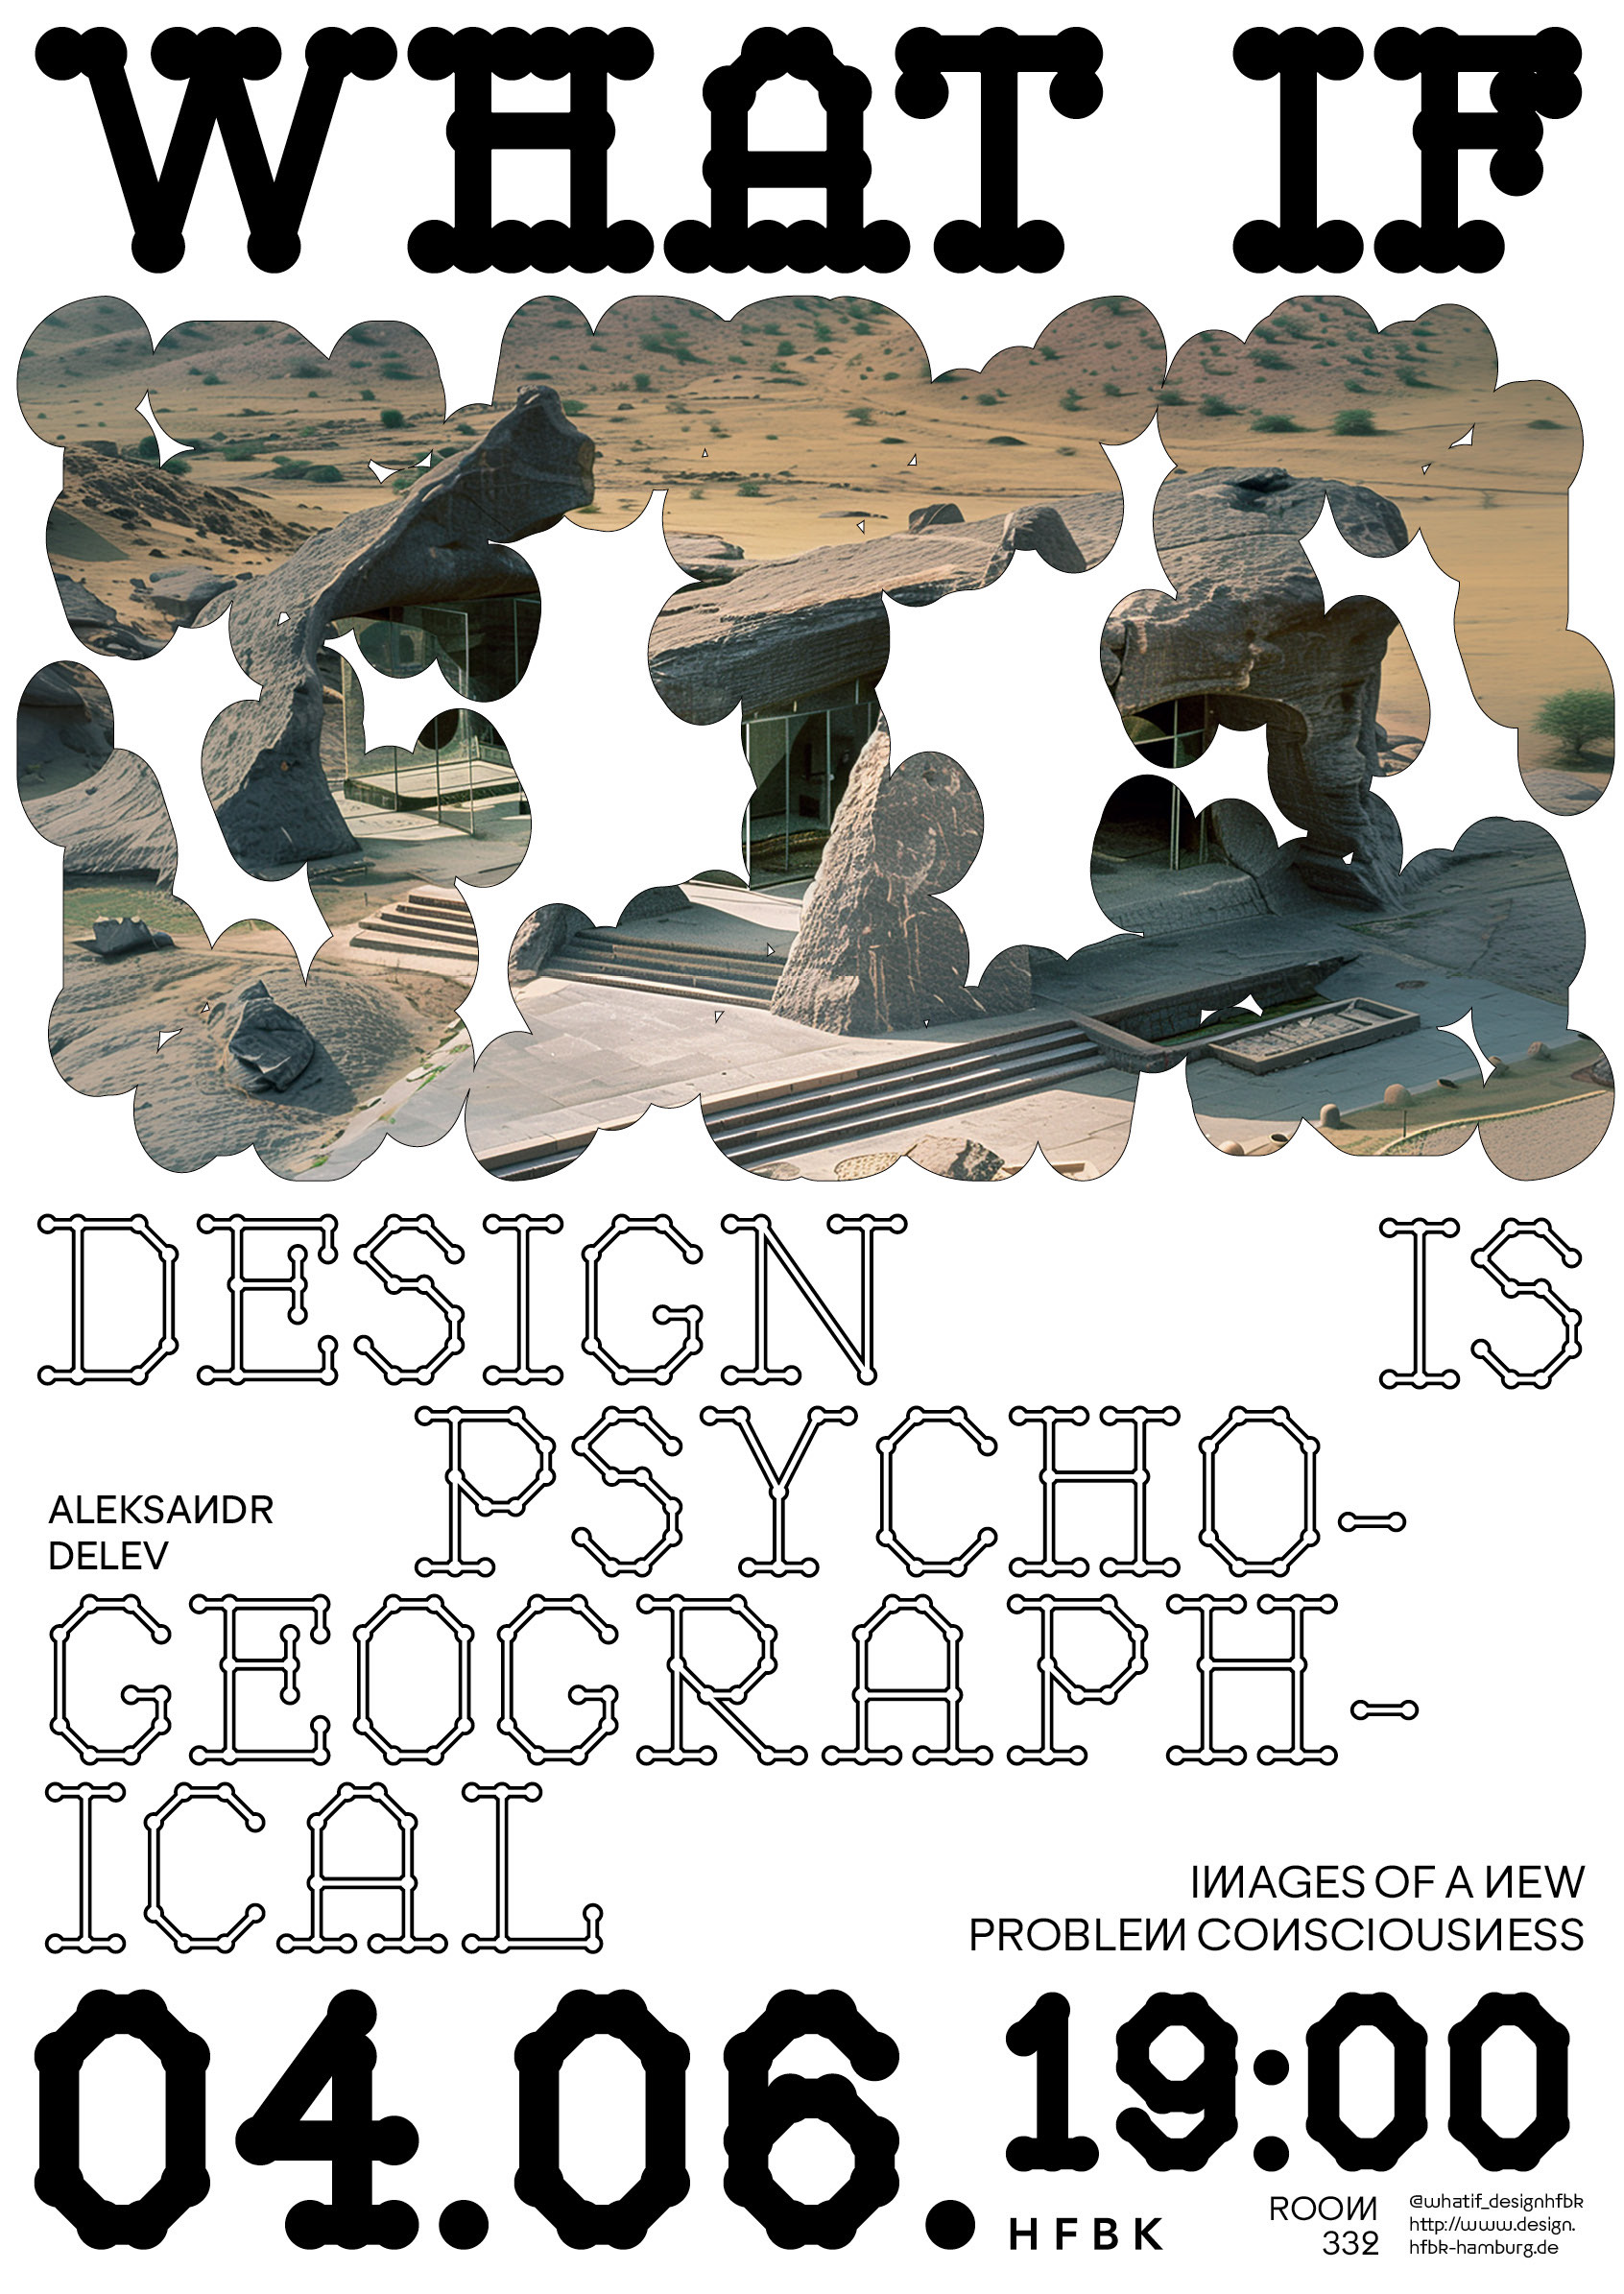 design is psycho-geographical